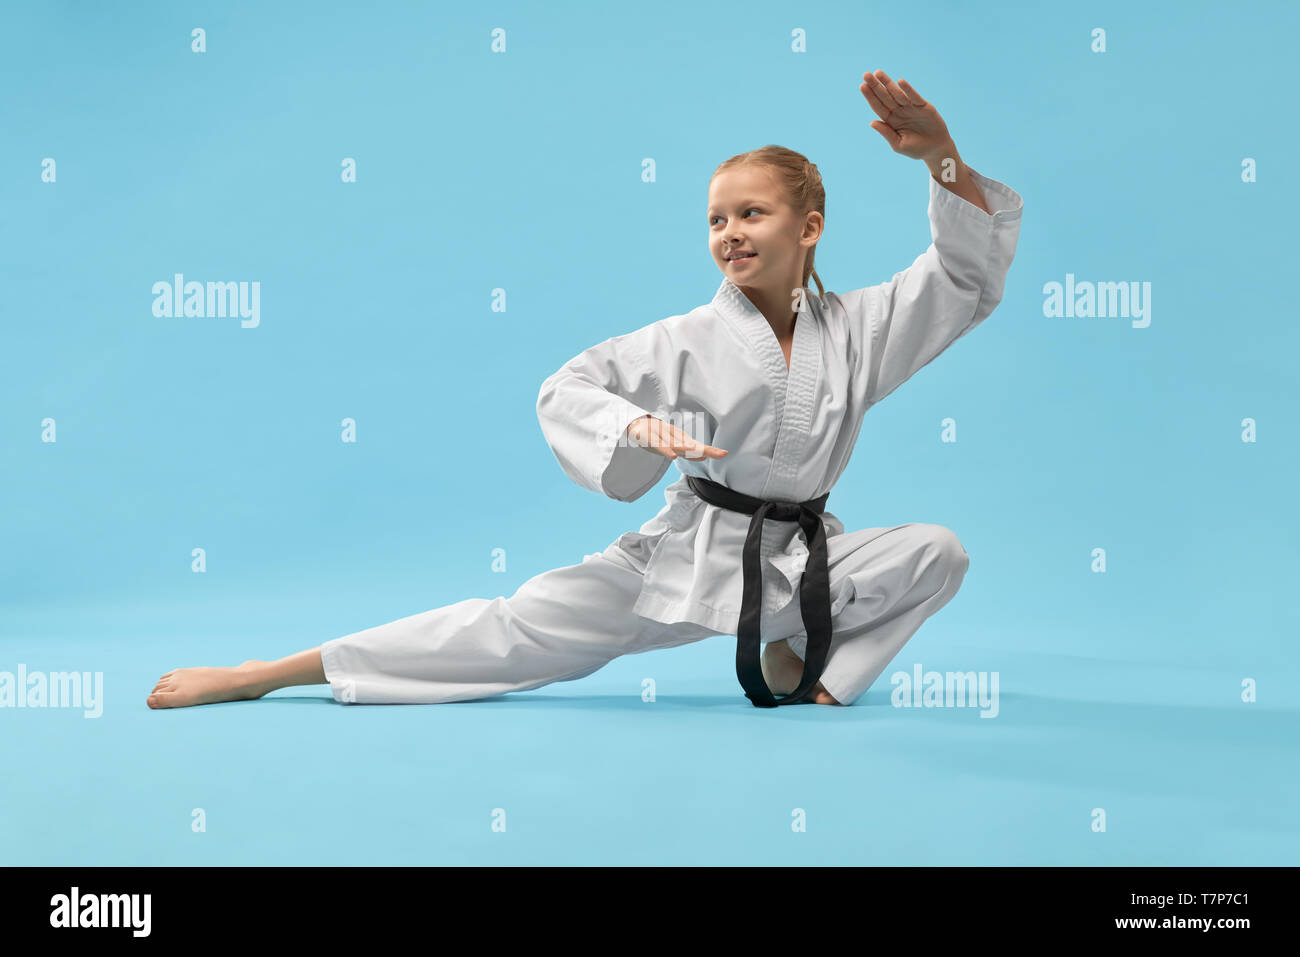 Cheerful little sports woman sitting on twine and practising karate on blue isolated background. Active girl wearing white kimono and black belt doing sport in studio. Concept of karate and jujitsu. Stock Photo